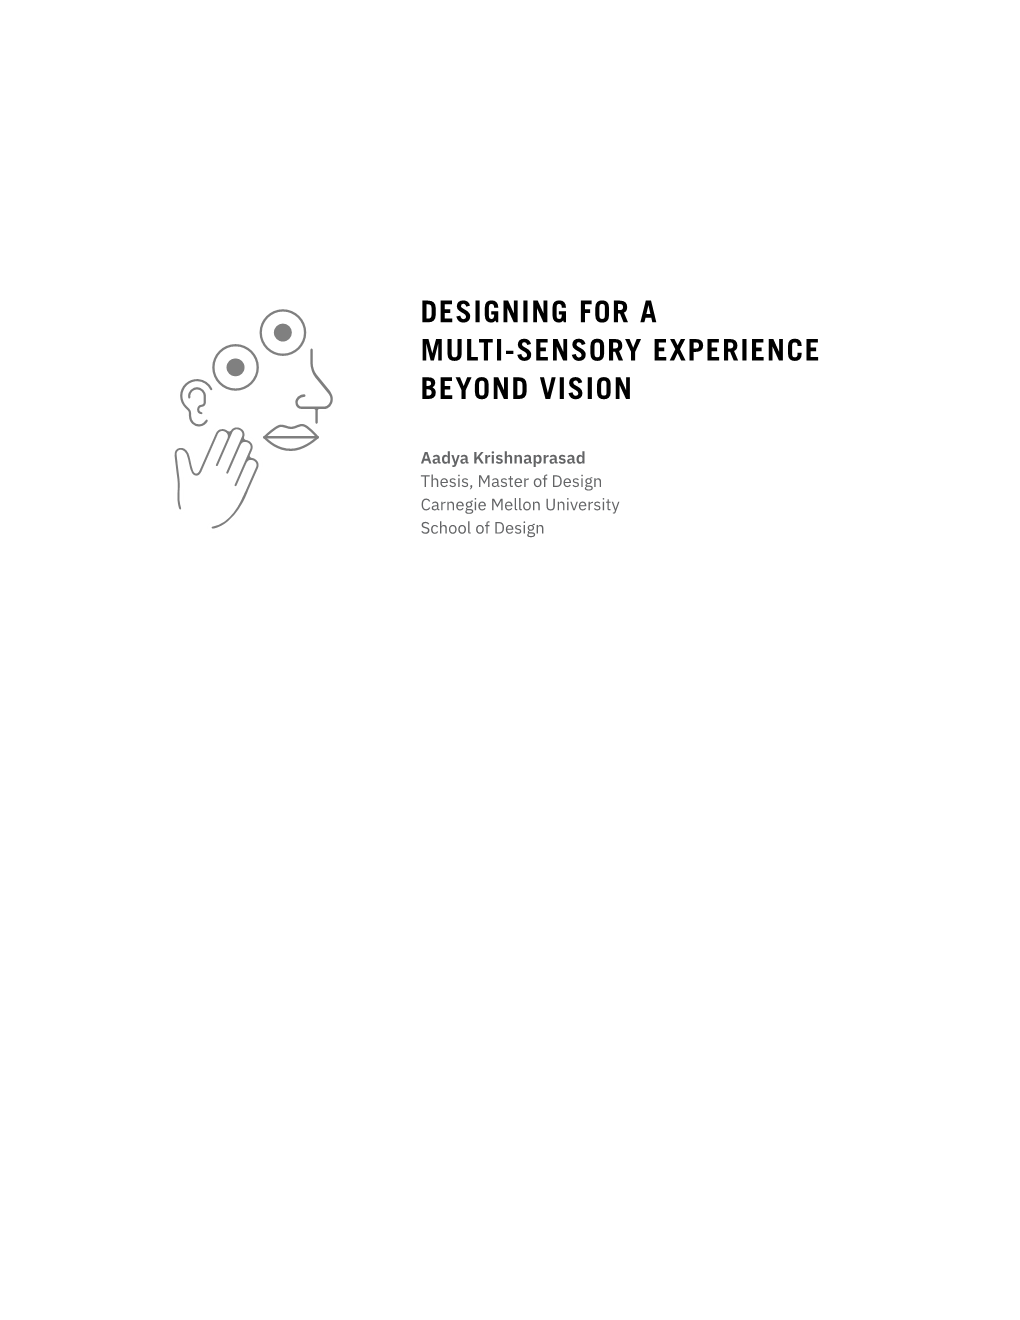 Designing for a Multi-Sensory Experience Beyond Vision